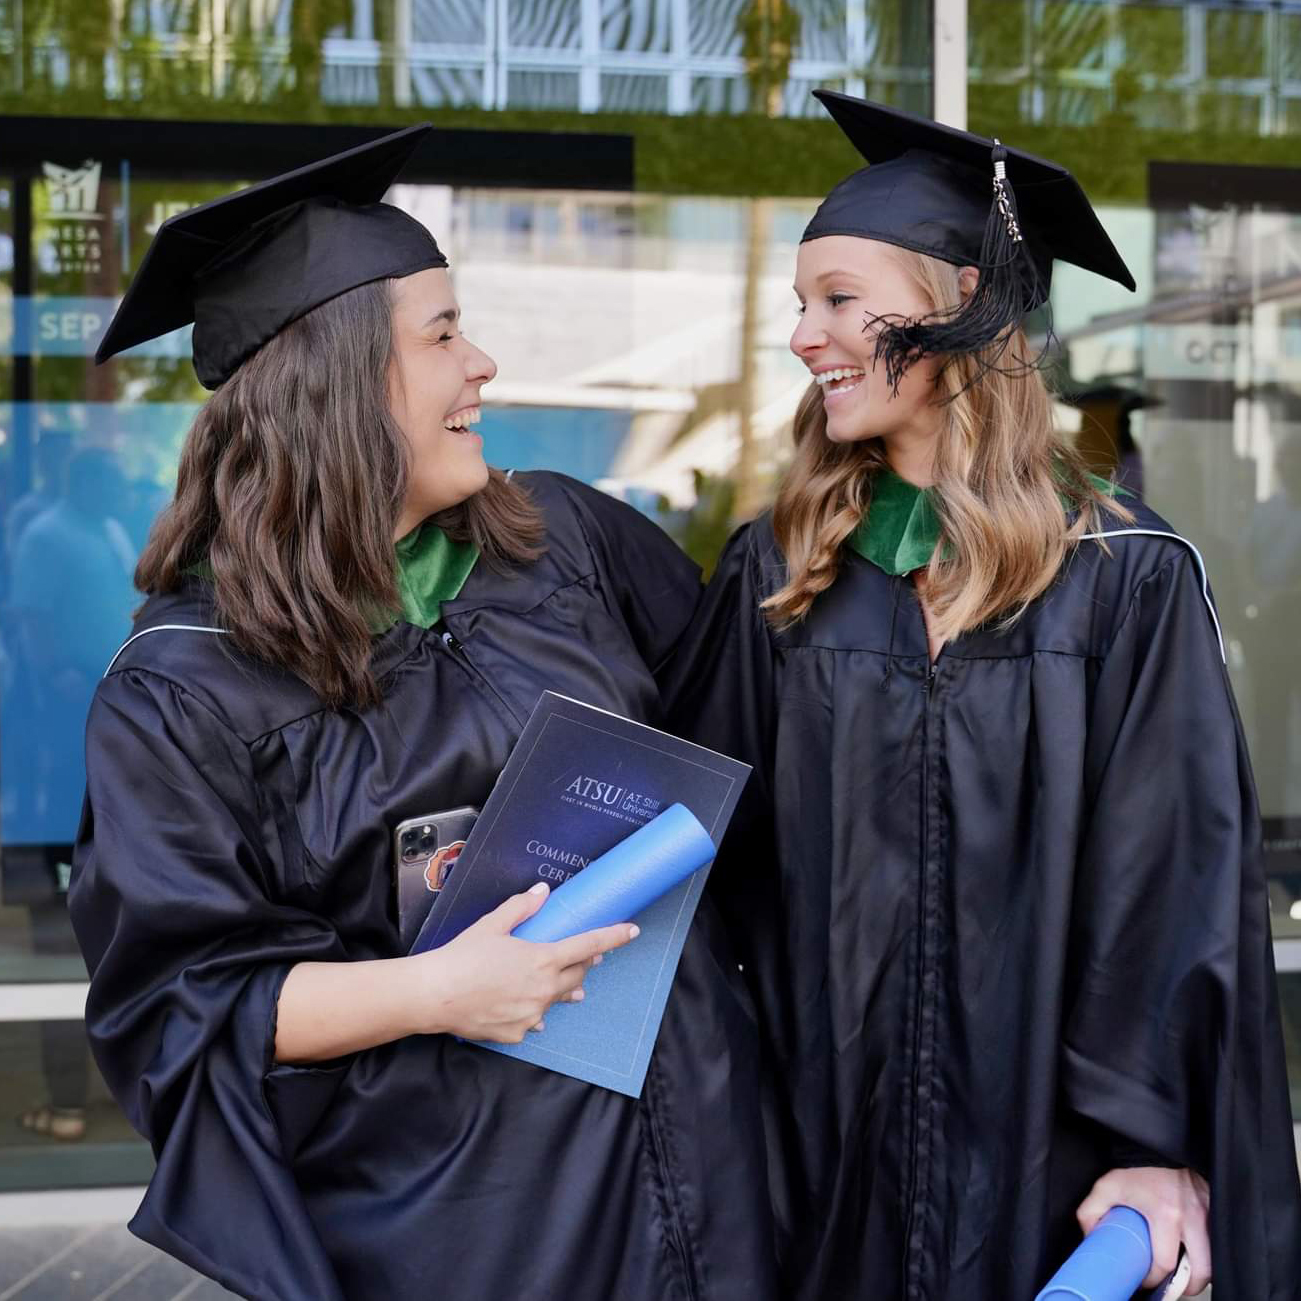 Two students smile at each other following graduation